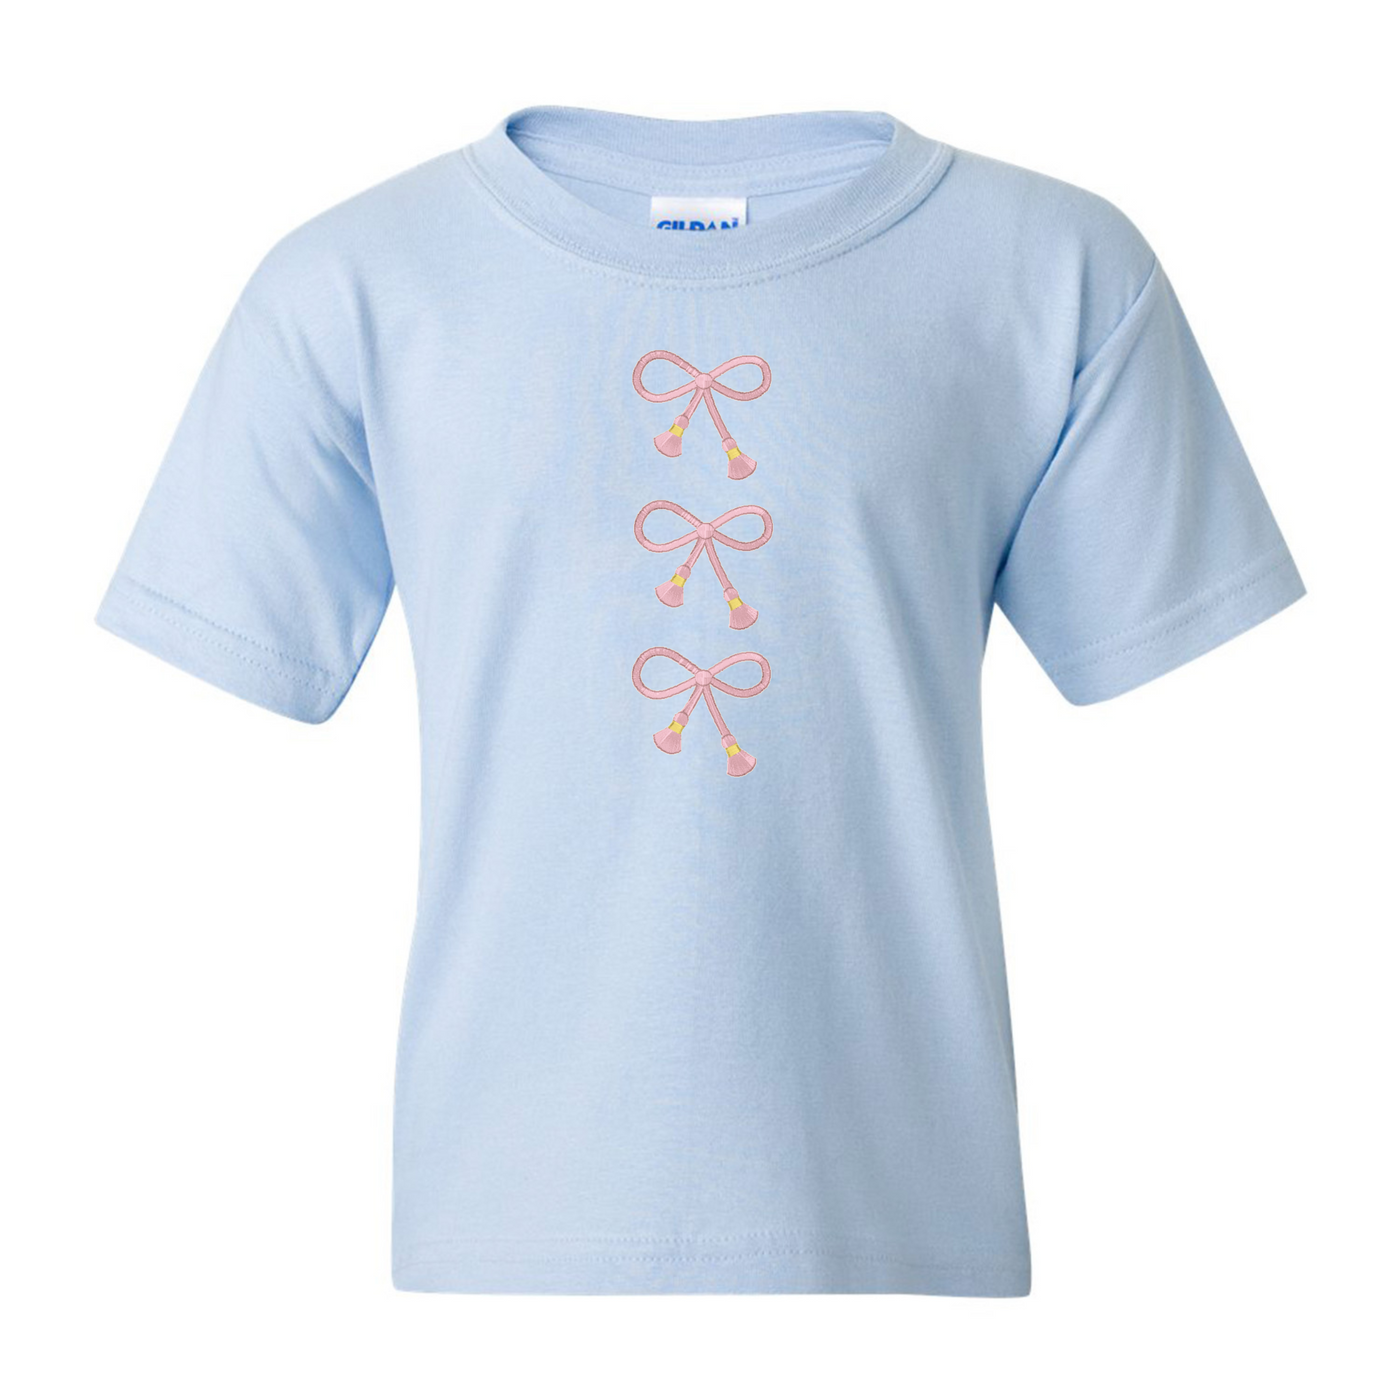 Kids Embroidered Tasseled 'Bows' T-Shirt